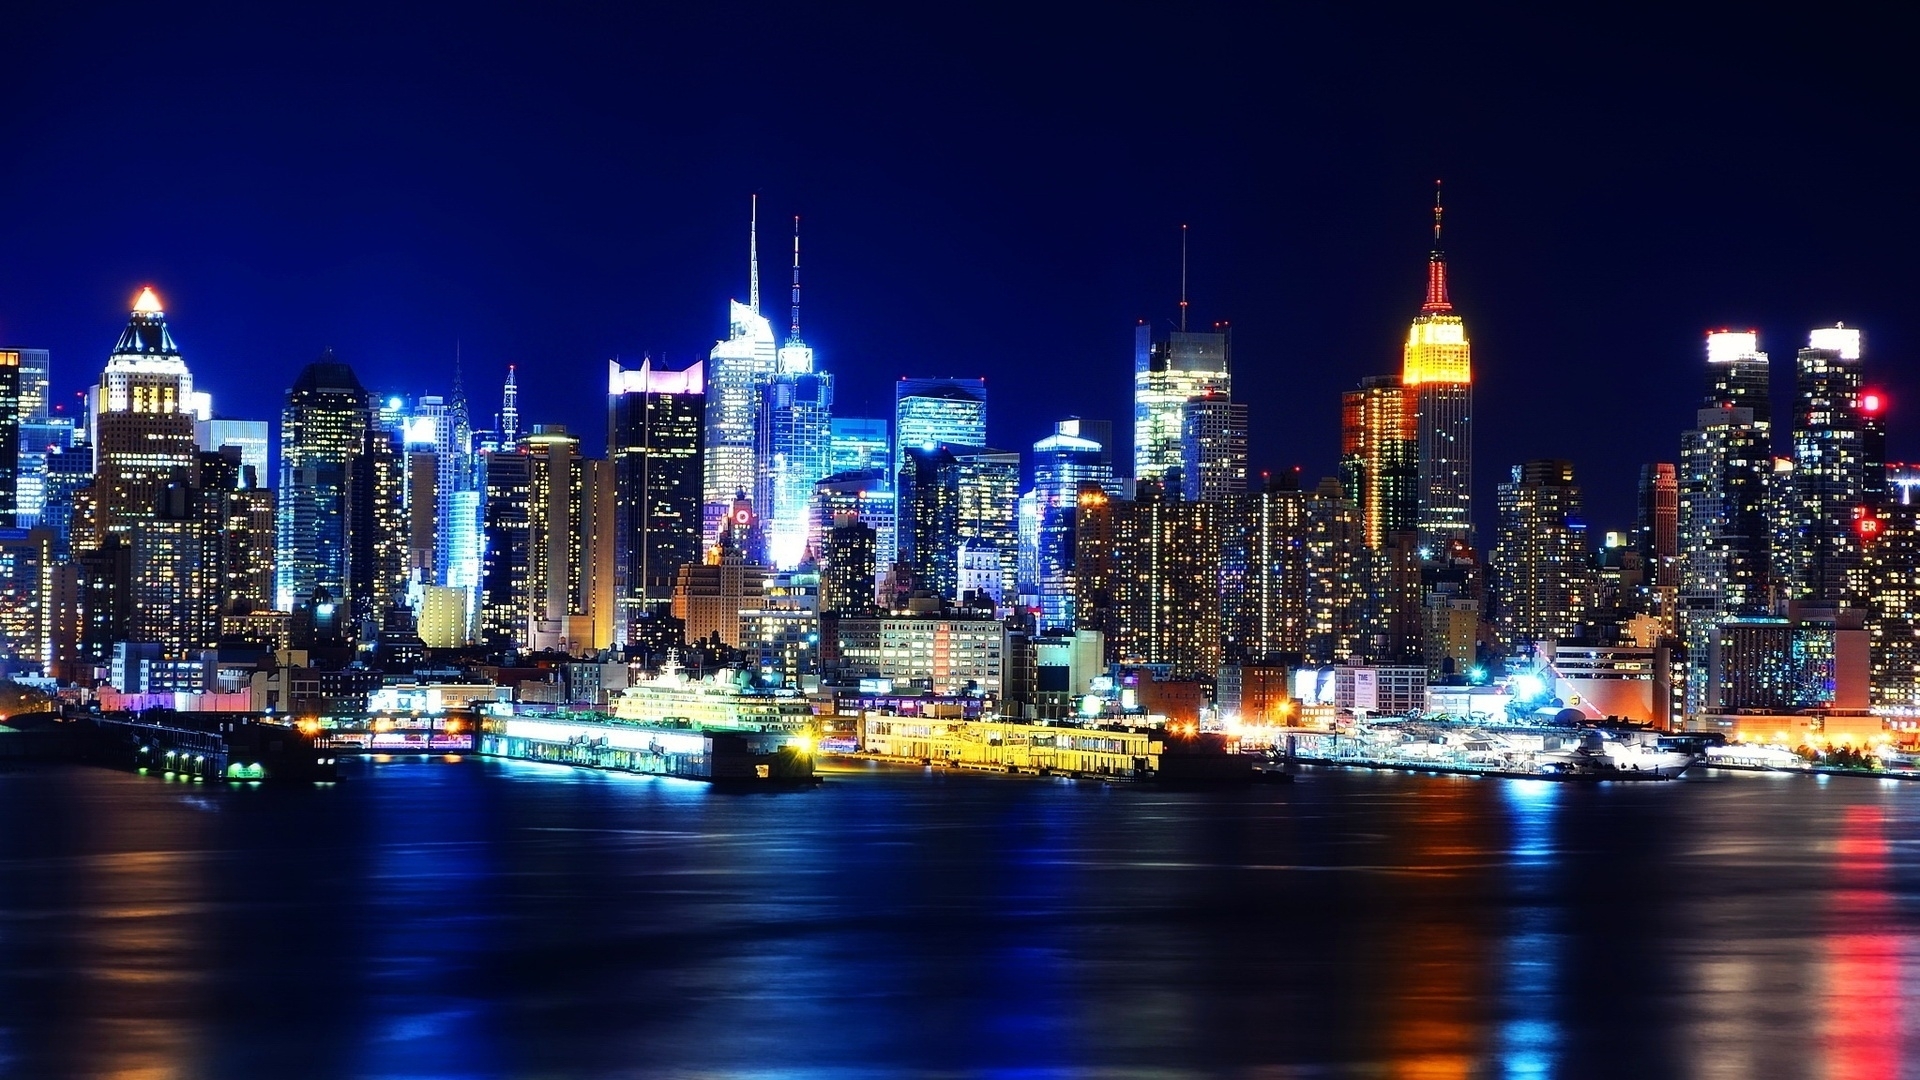 10 Best New York City At Night Pictures FULL HD 1080p For PC Background